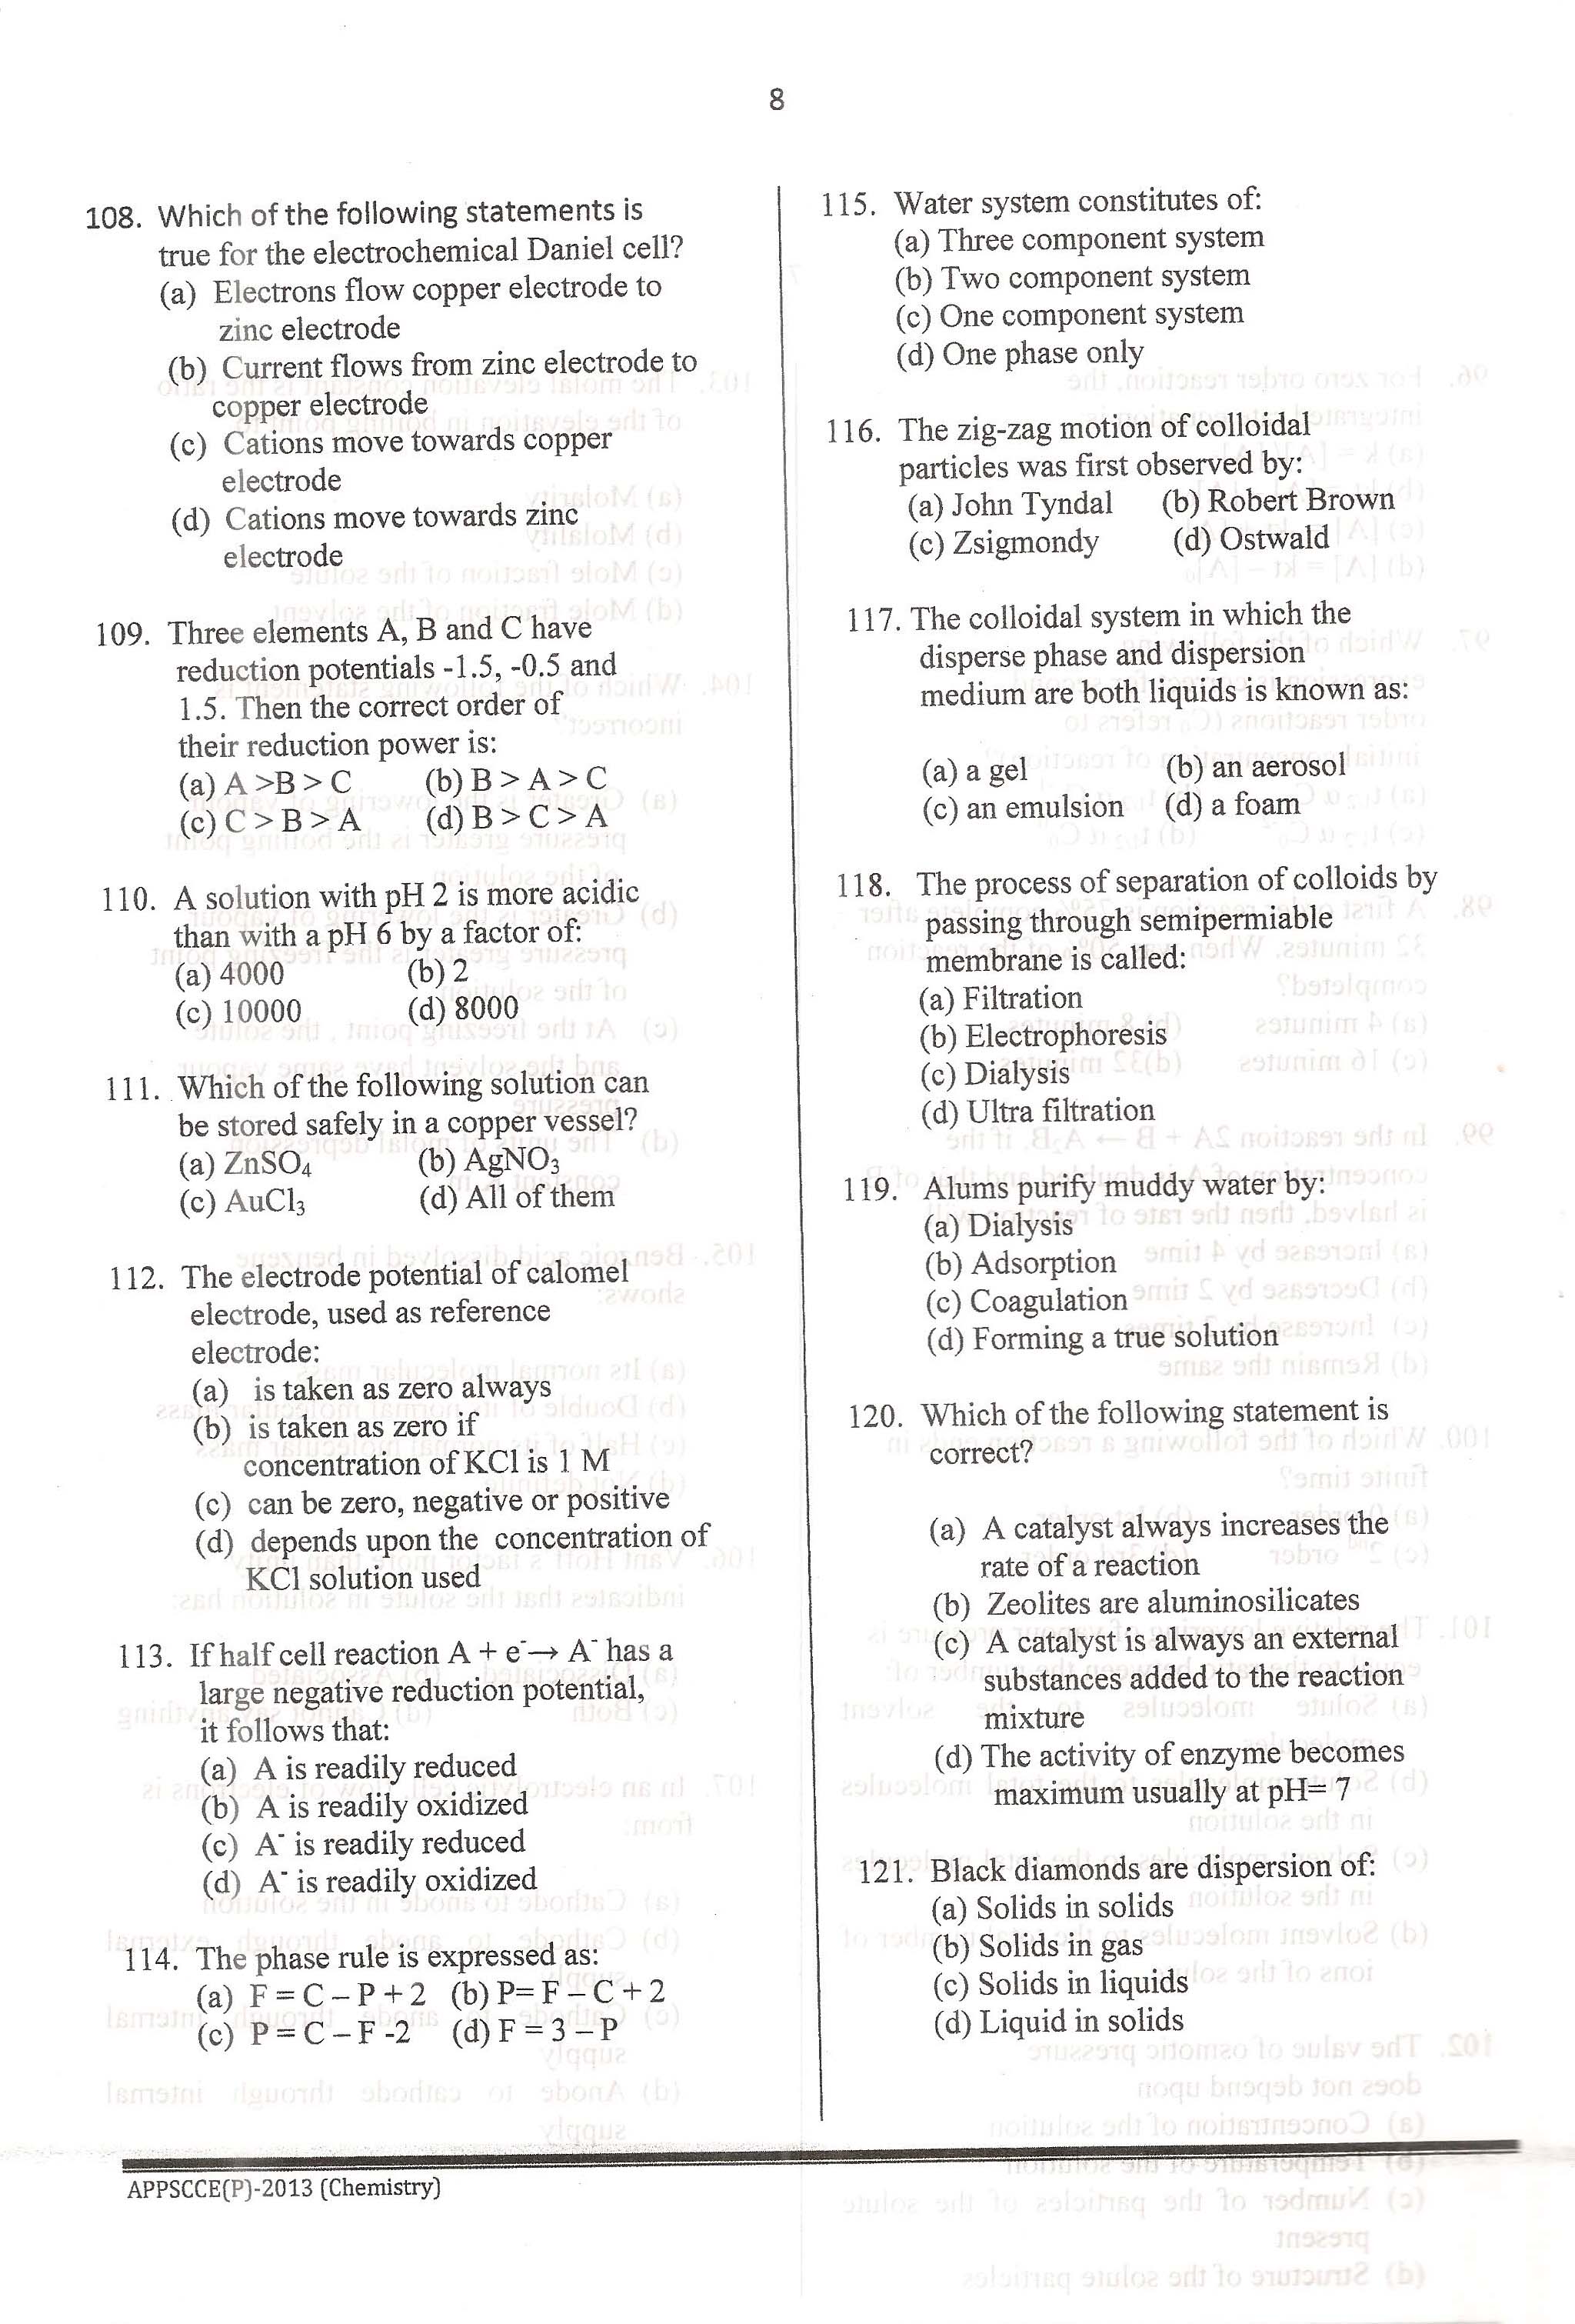 APPSC Combined Competitive Prelims Exam 2013 Chemistry 9